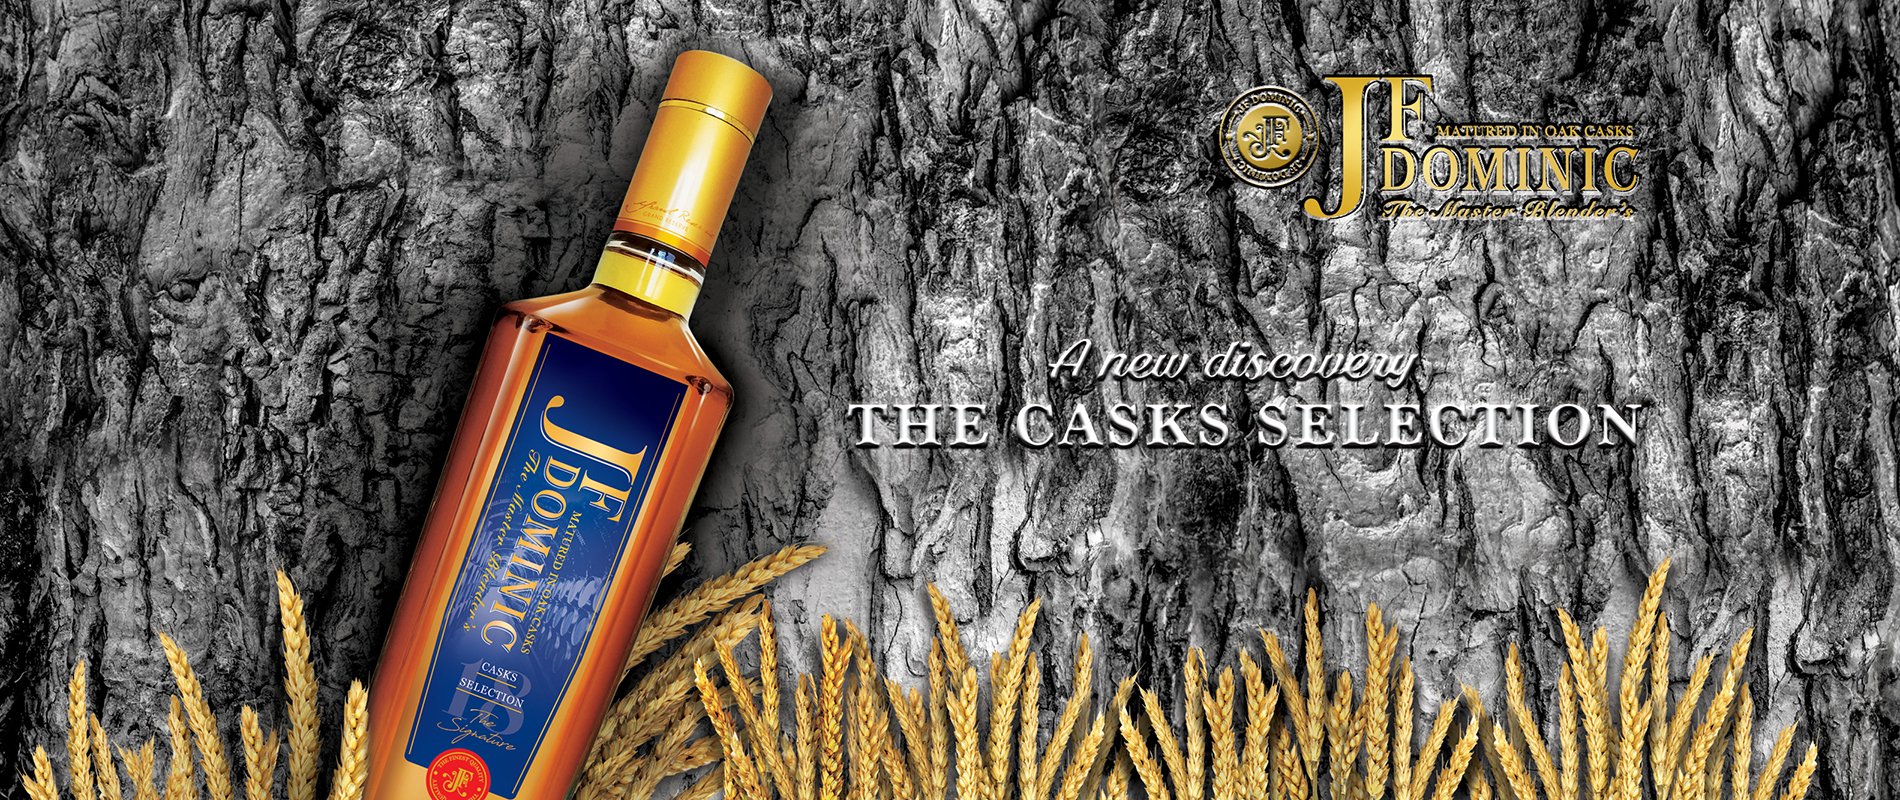 JF Dominic Casks Selections The Master Blender's of Premium Selection